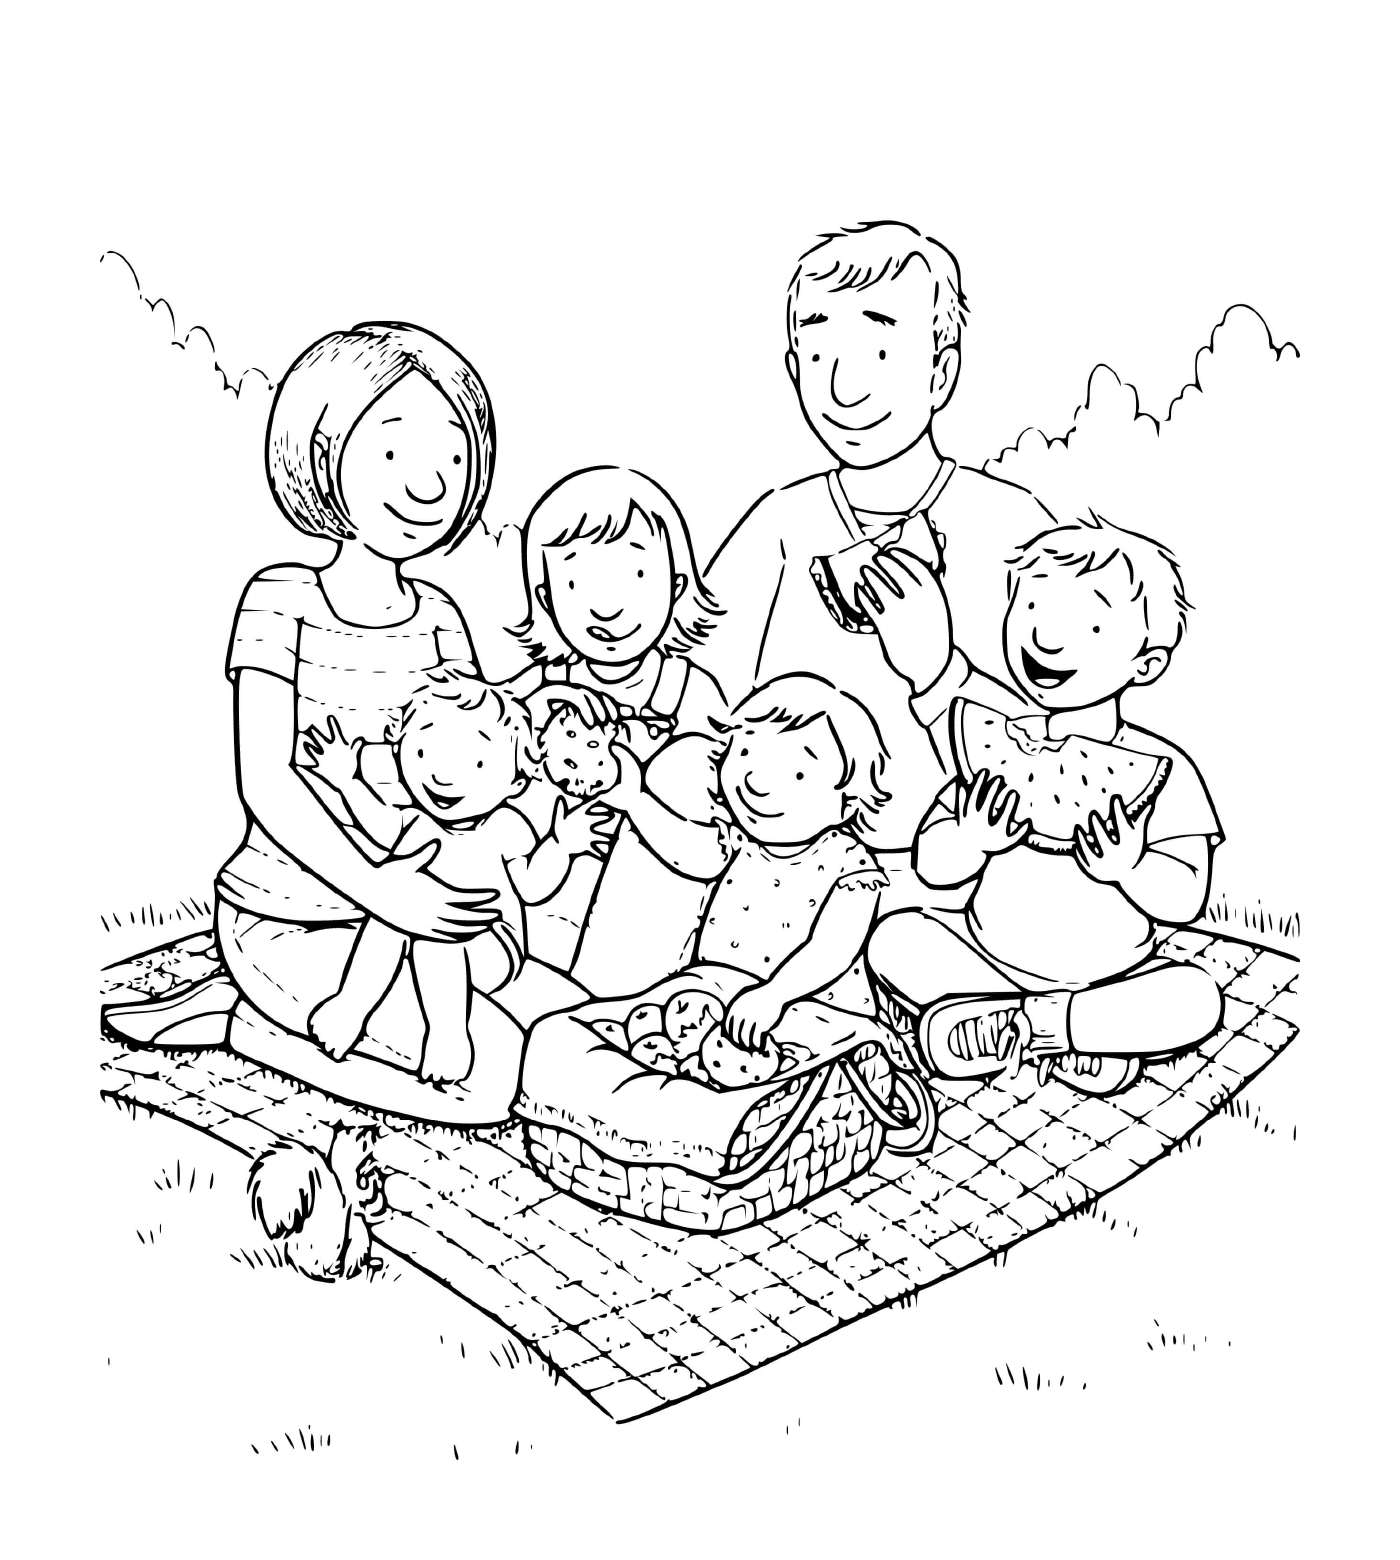  A family of four children taking a picnic on a blanket in the grass 